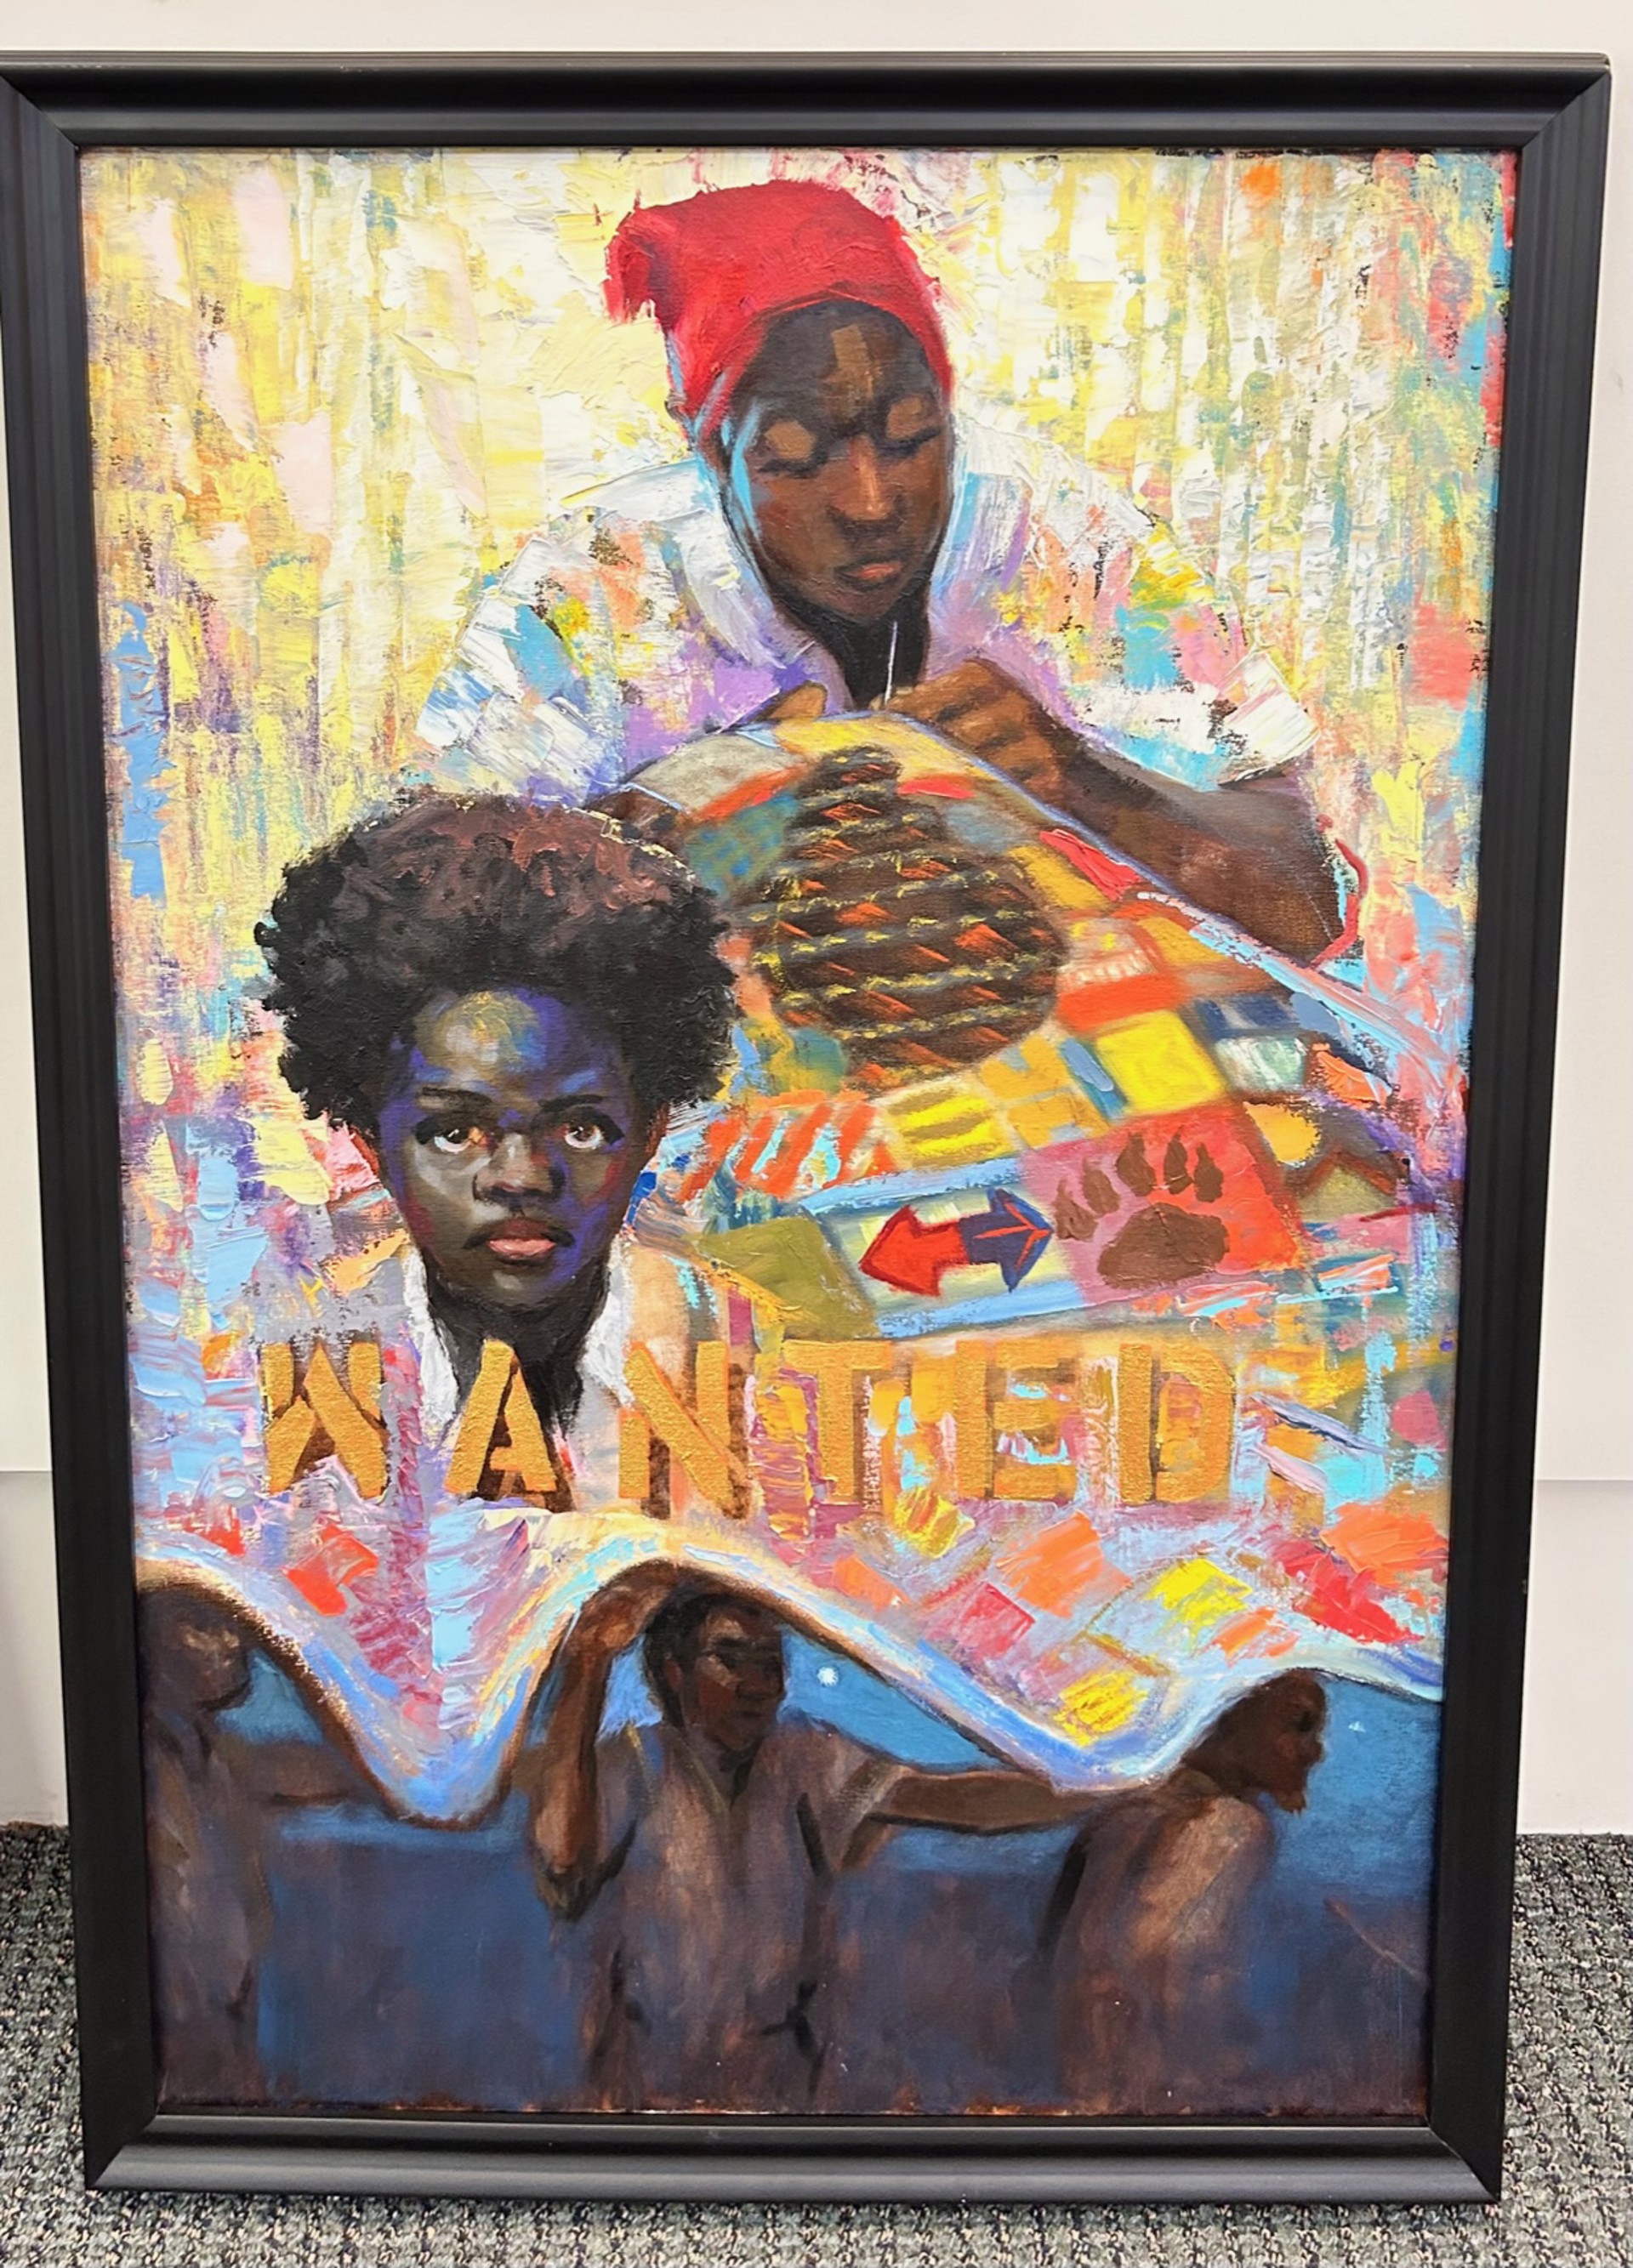 "The Quilters" by Robert Ketchens